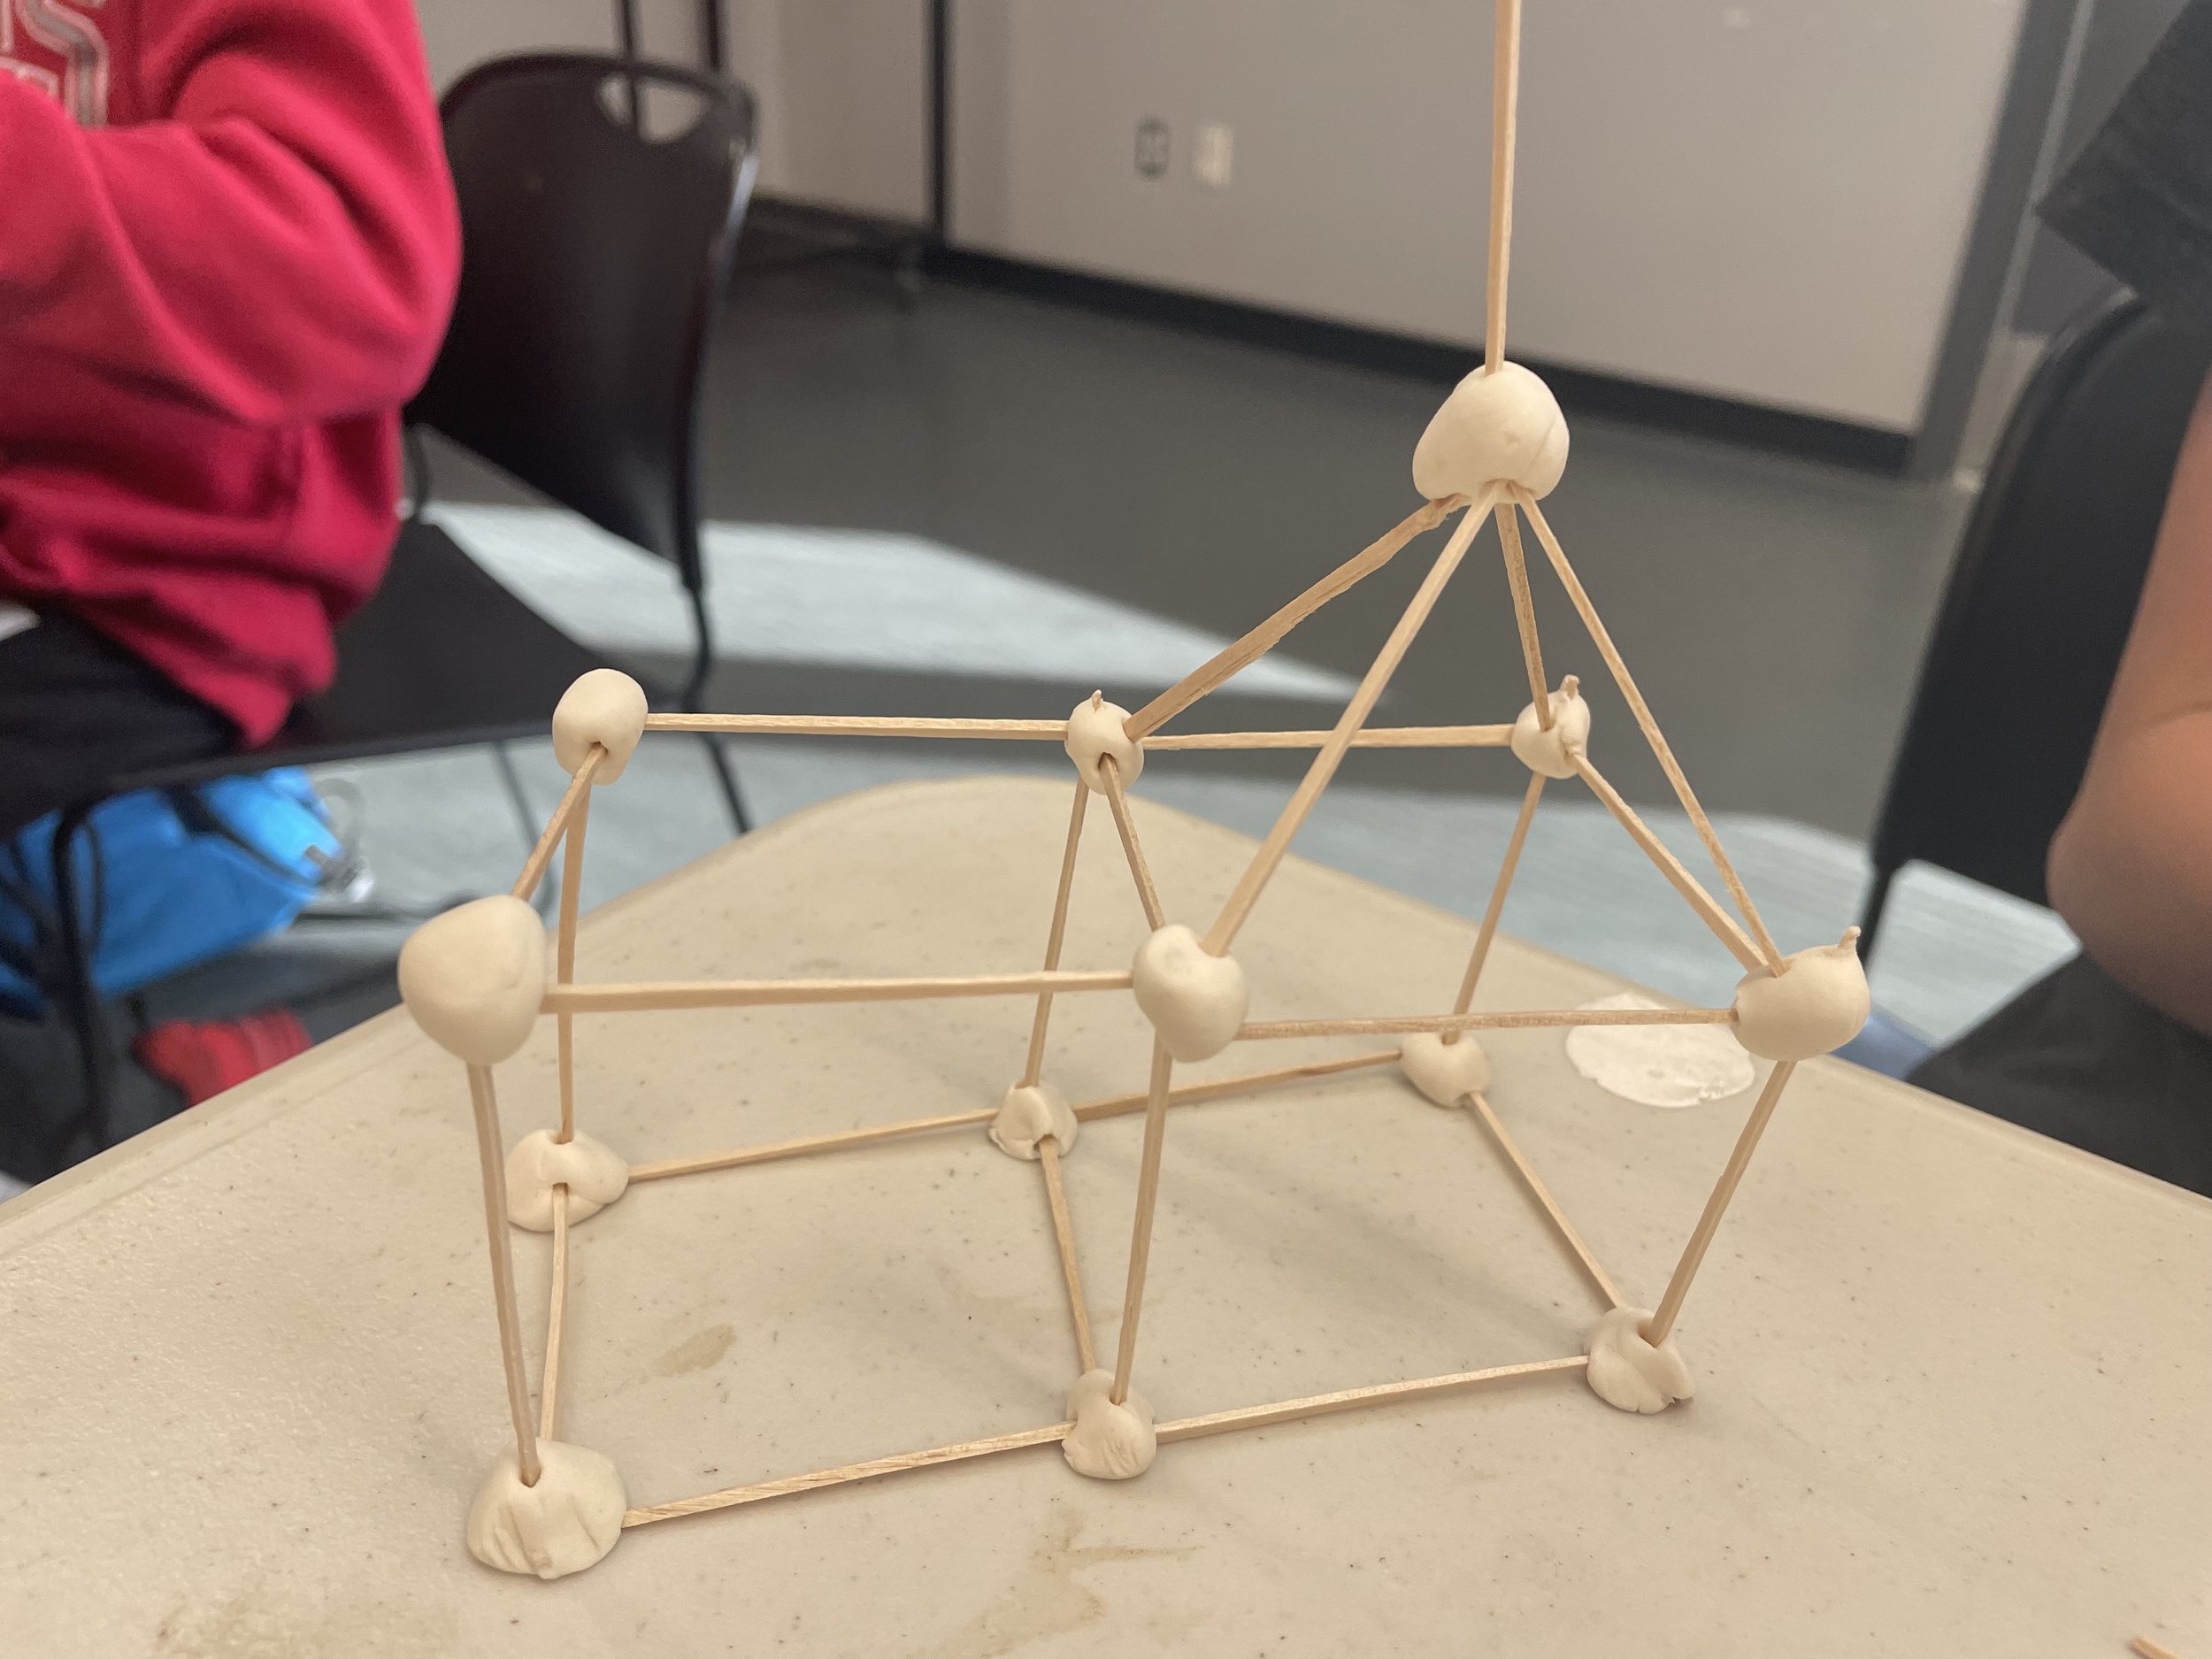 Building Structures in STEM at the Mac (Copy)